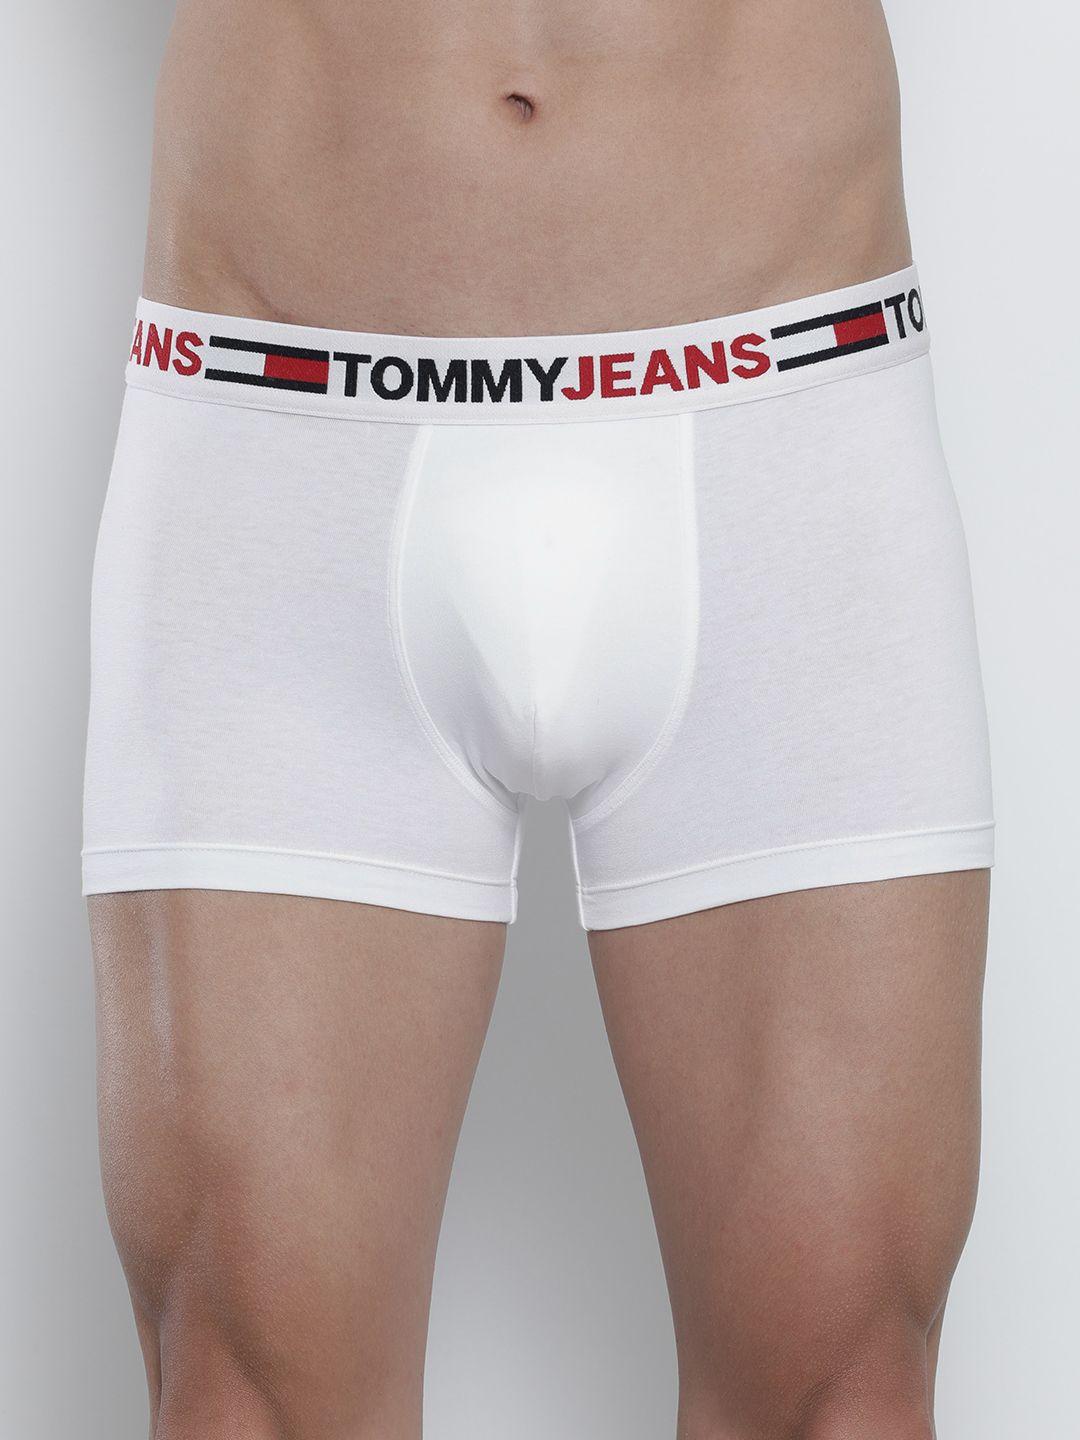 tommy-hilfiger-men-white-solid-trunk-p2ab4147